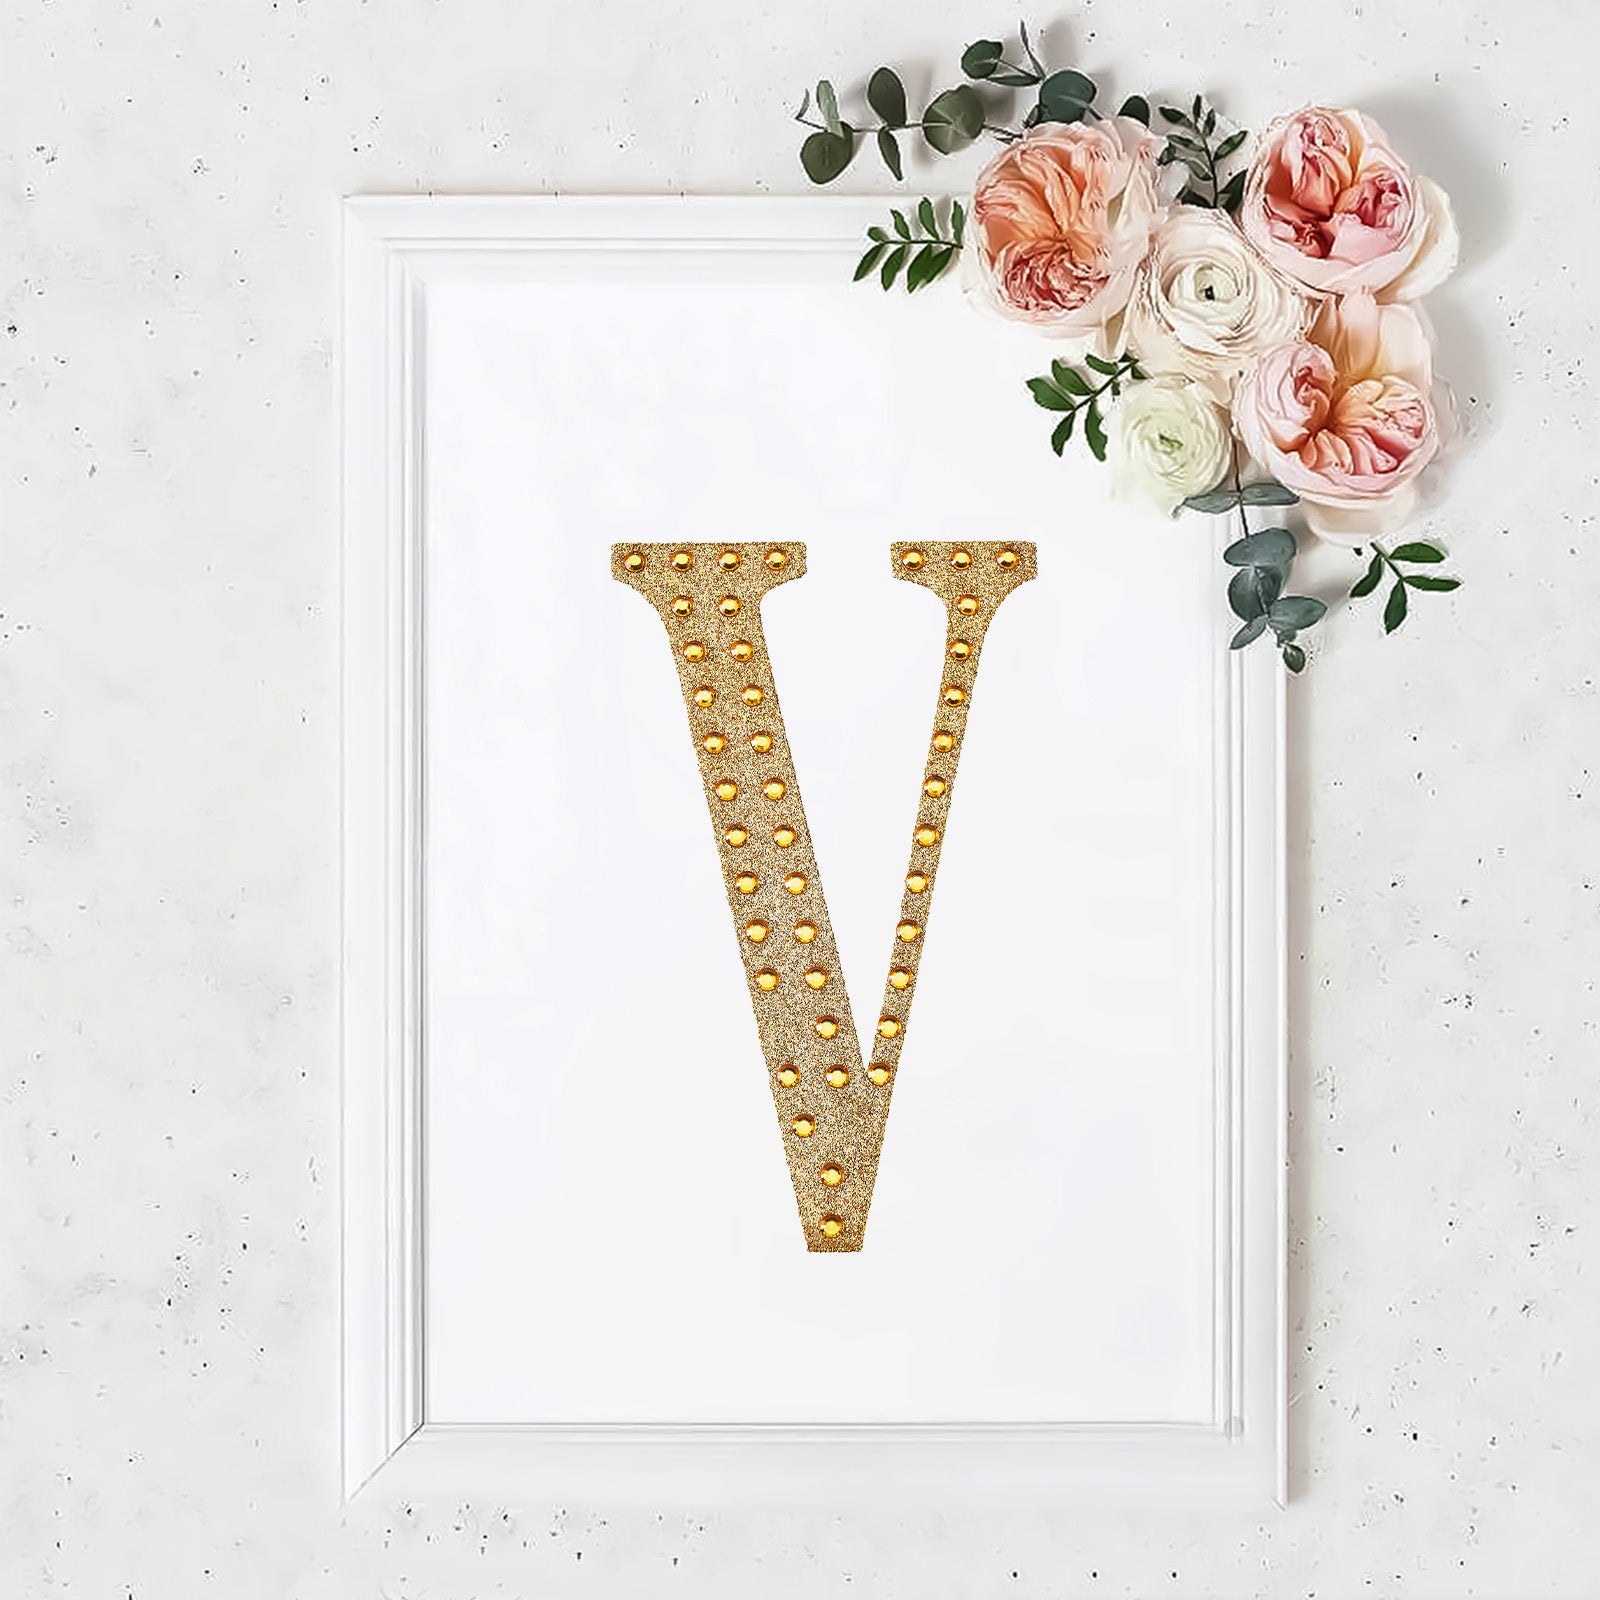 8 Gold Decorative Rhinestone Alphabet Letter Stickers DIY Crafts - V | by Tableclothsfactory